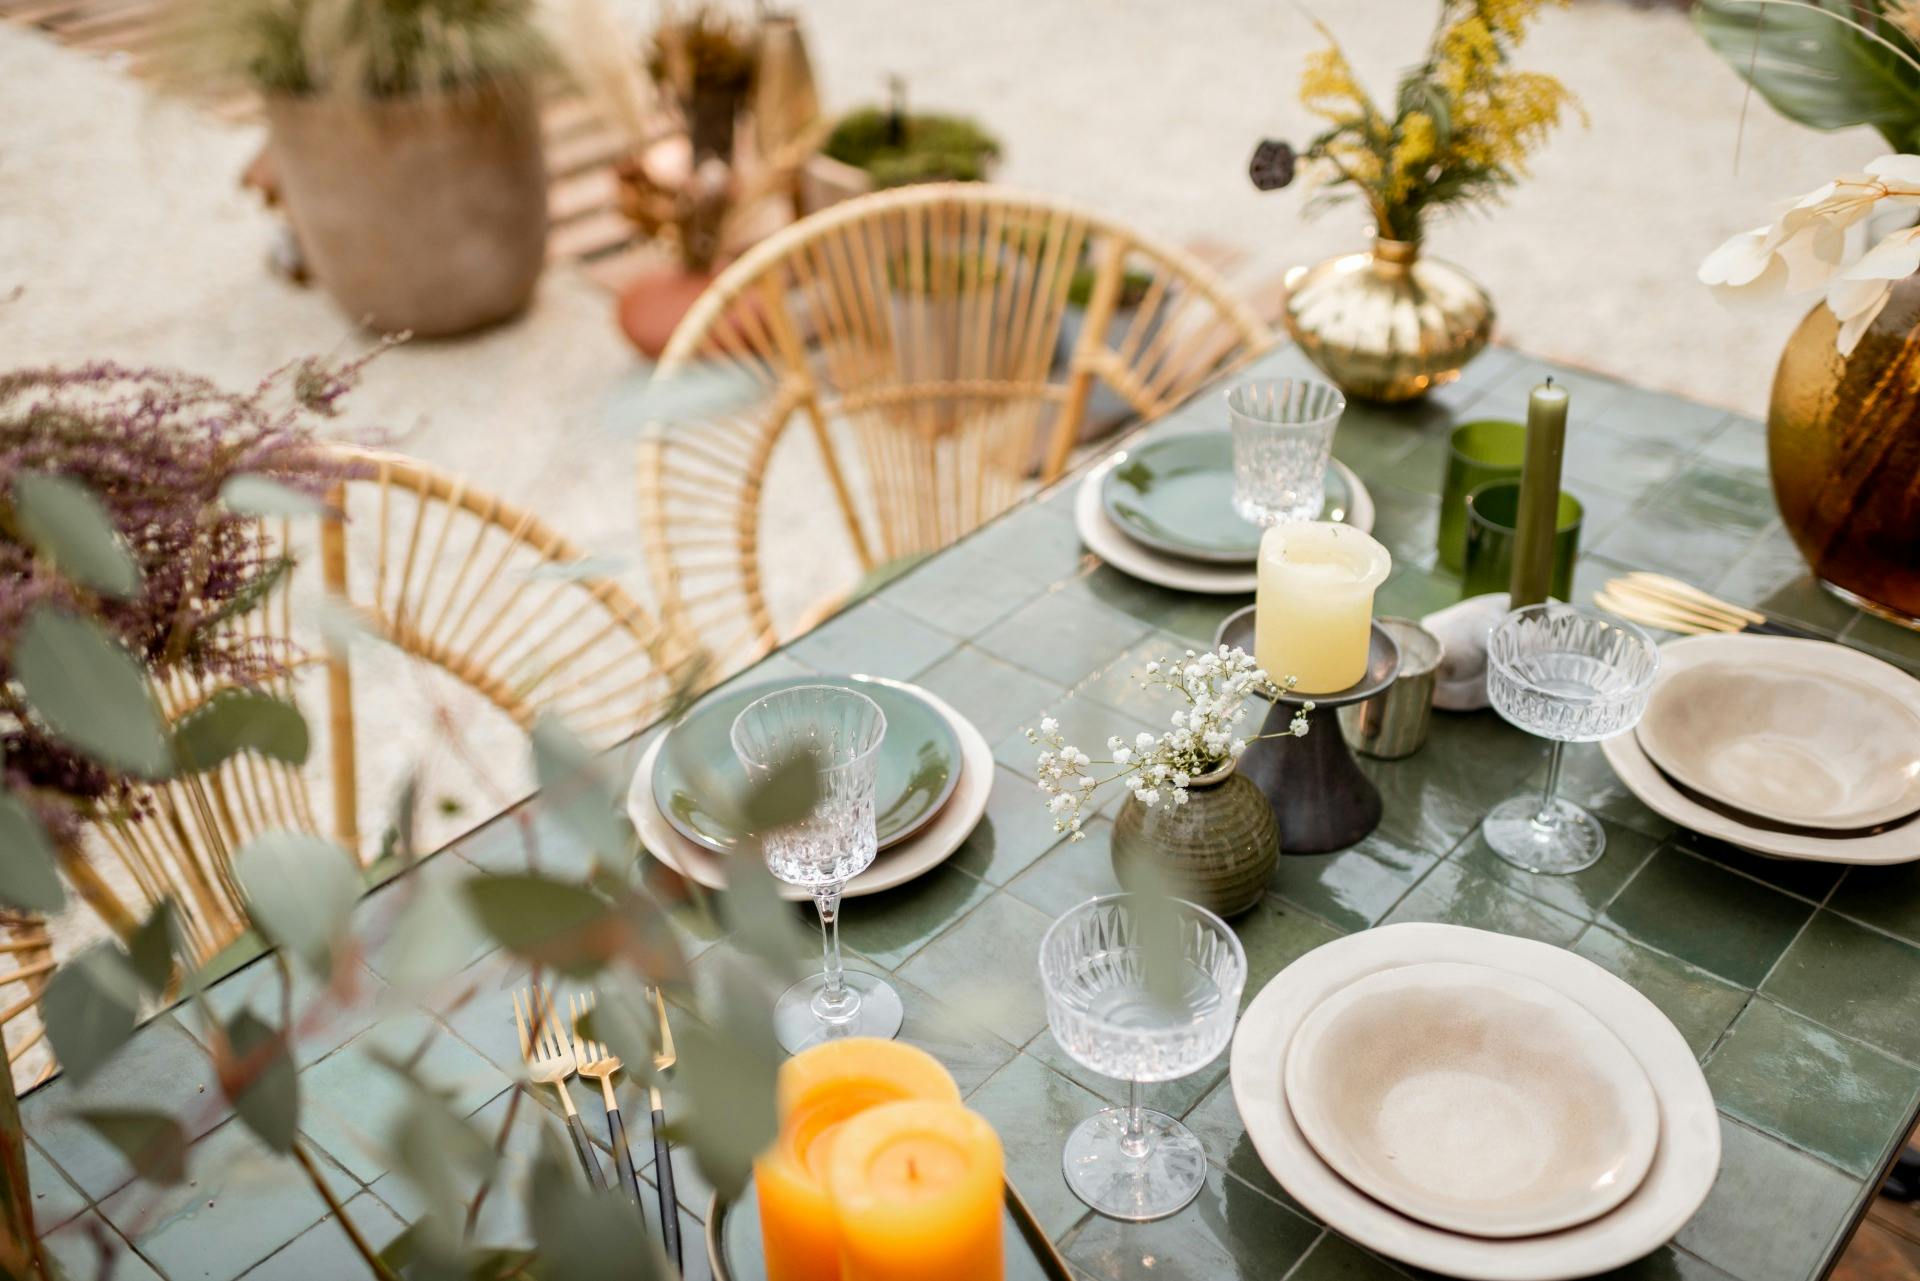 6 Fresh Centrepiece Ideas To Make Your Table Stand Out